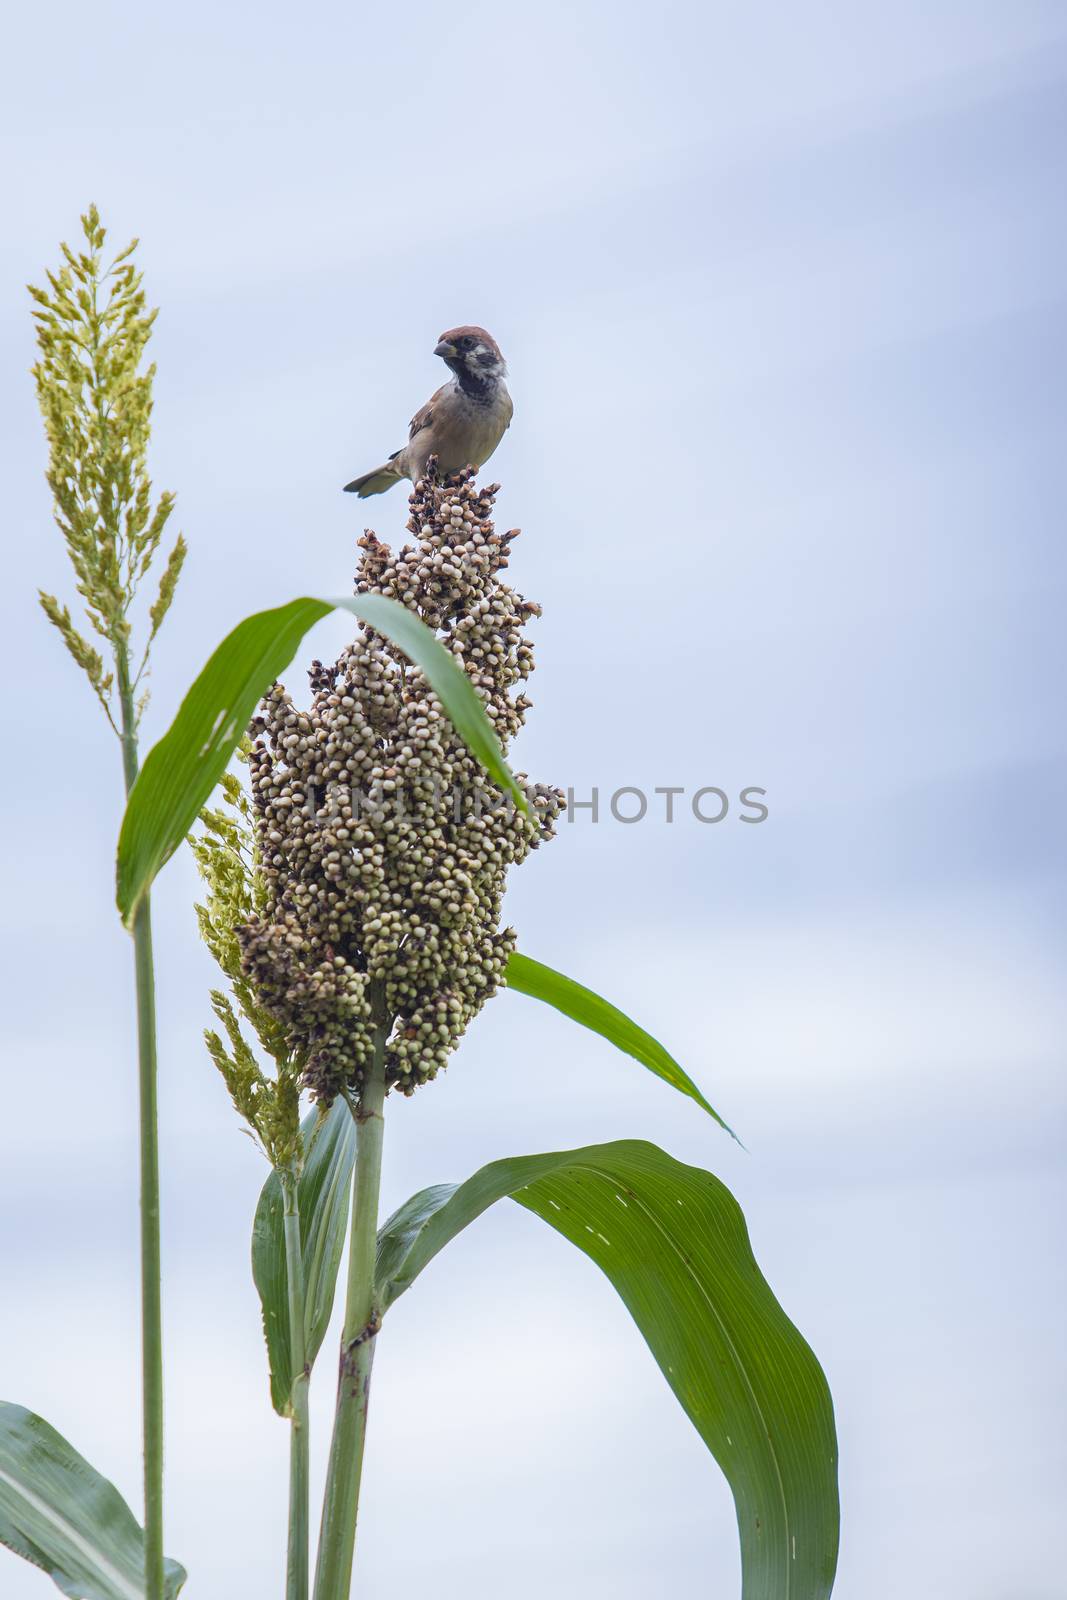 sparrow bird on sorghum plant and white blue sky by khunaspix